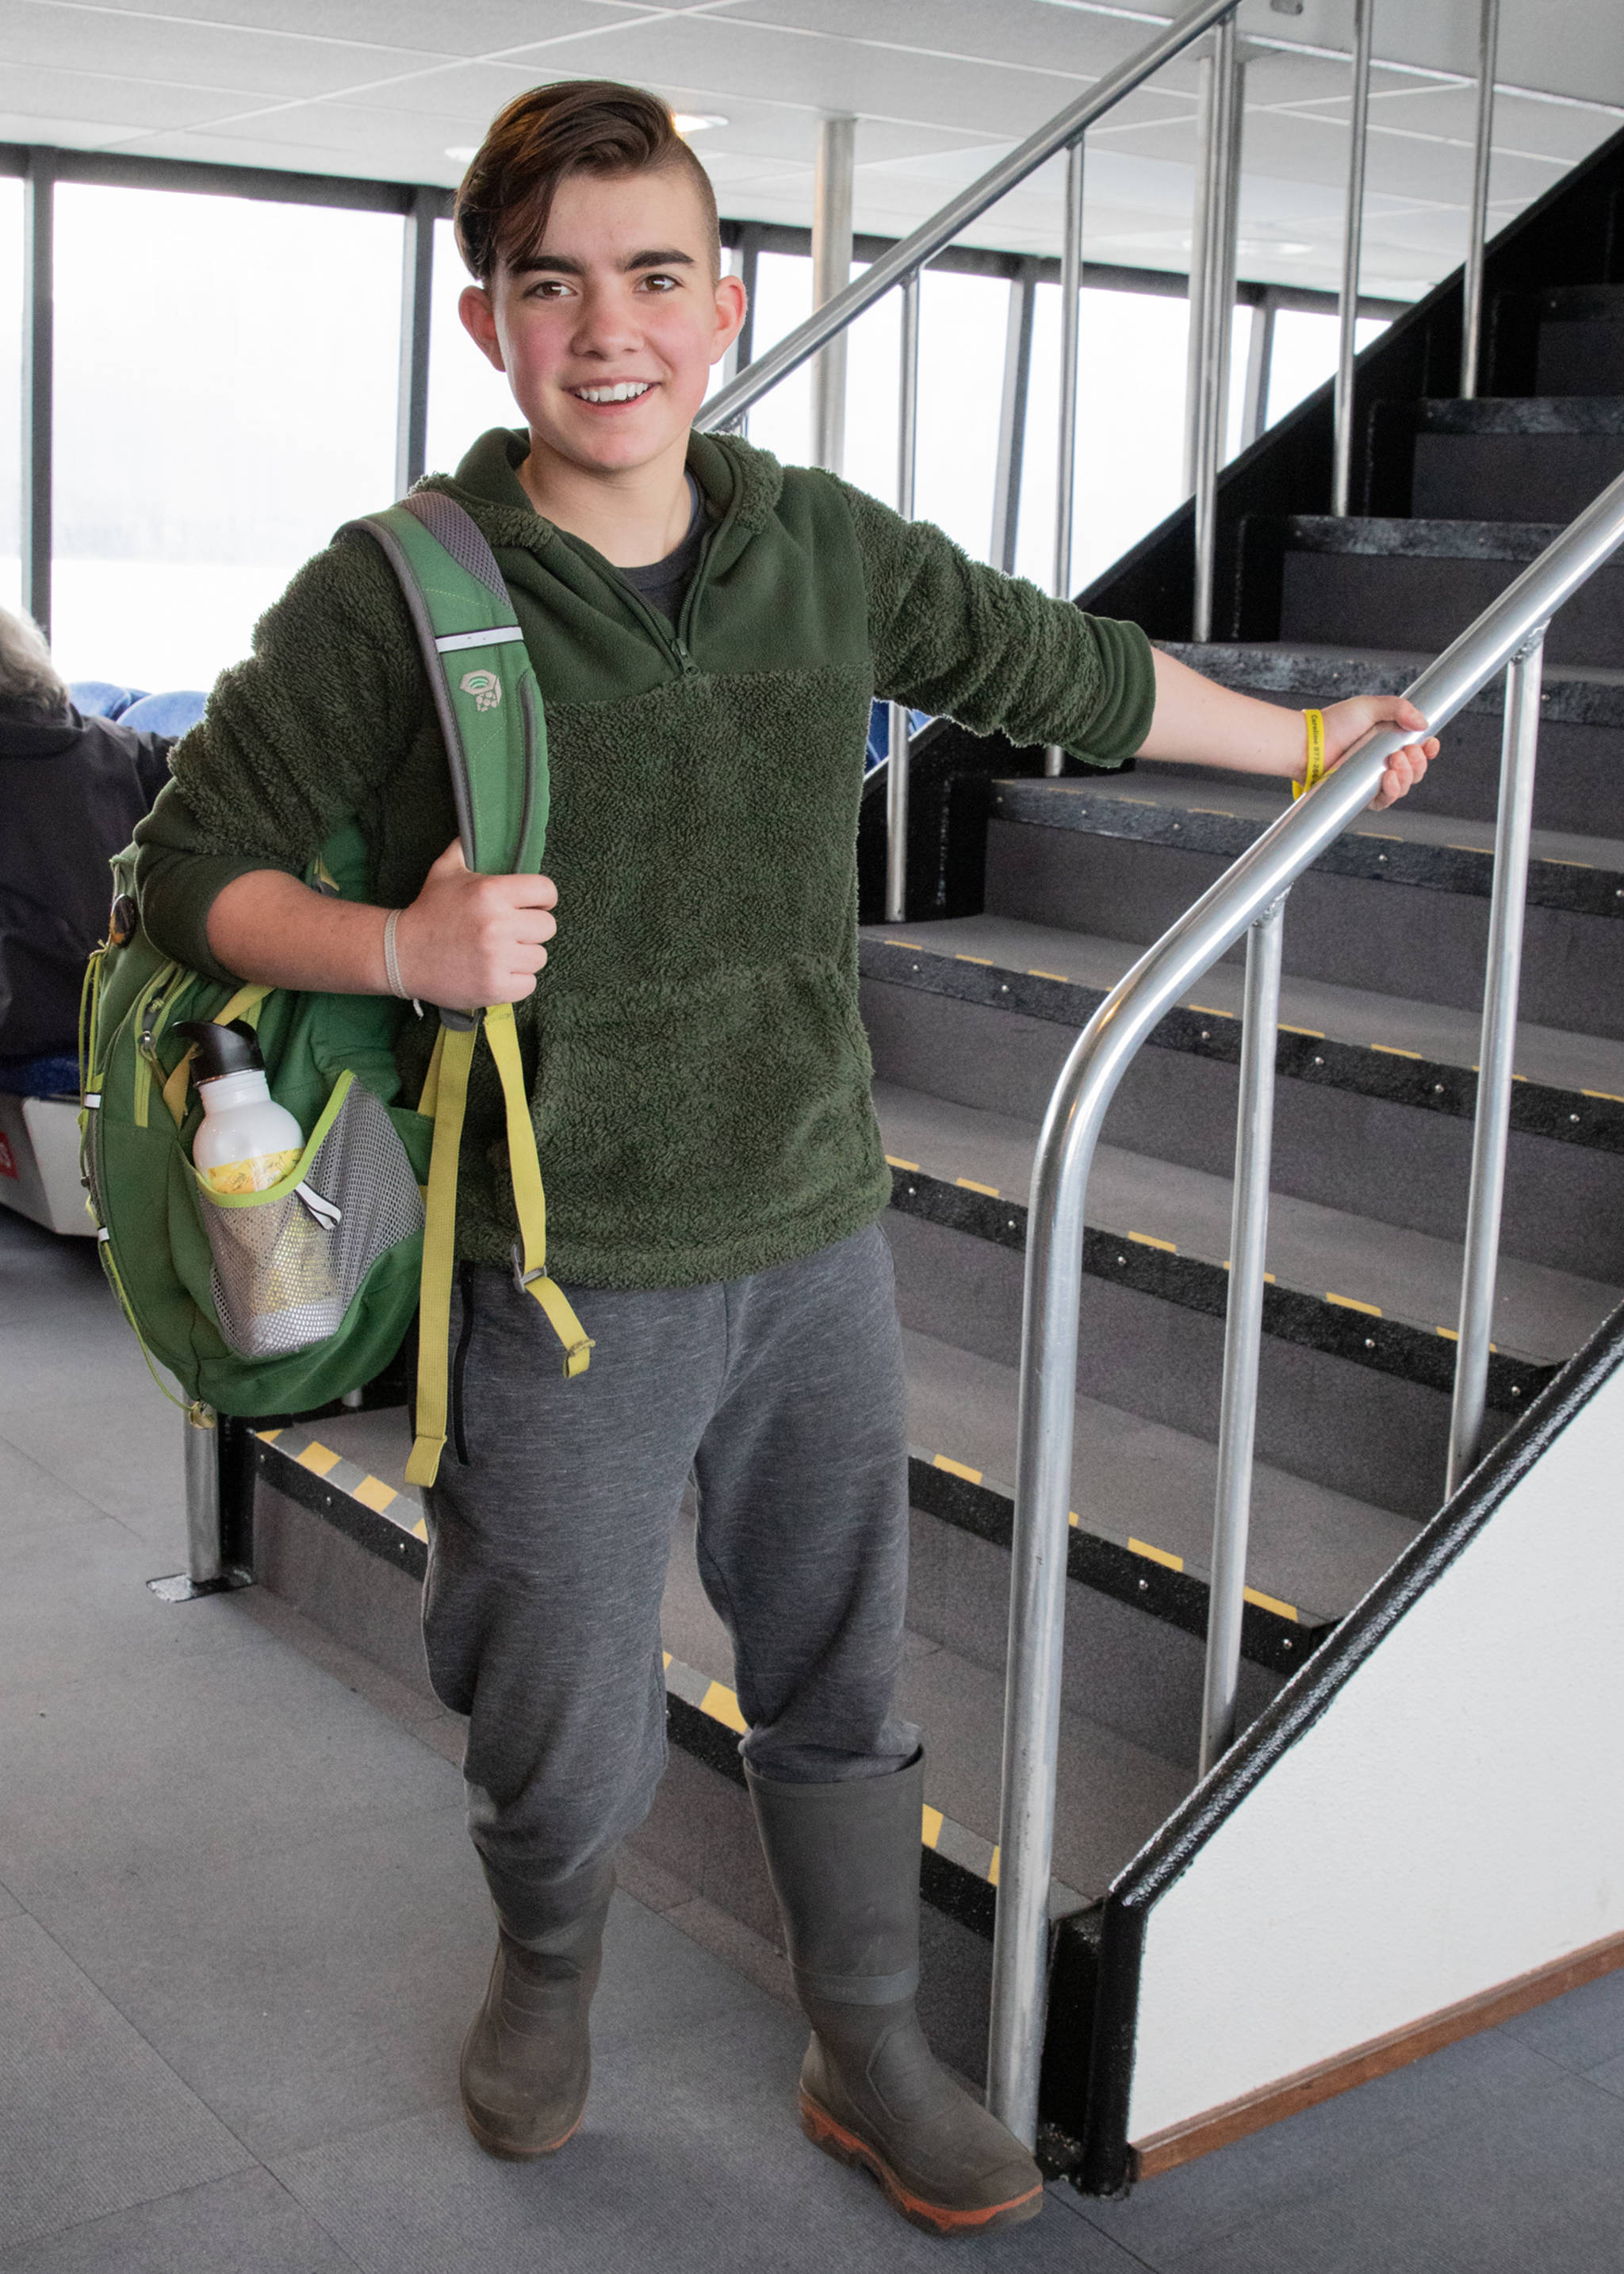 May 19, 2019: Seth Coppens, an eighth grader at the Juneau Montessori School, has artistic flair. On this day, aboard an Allen Marine boat, he wore simple and livable clothes: a forest green fleece pullover and gray sweat pants by Dip, mandatory Grundens boots and a Mountain Hardwear backpack. What also caught my eye was his great undercut hair style, which he created, and his genuine smile. Seth is also an accomplished playwright — his original play, “Sockeye,” was performed in Juneau earlier in May.